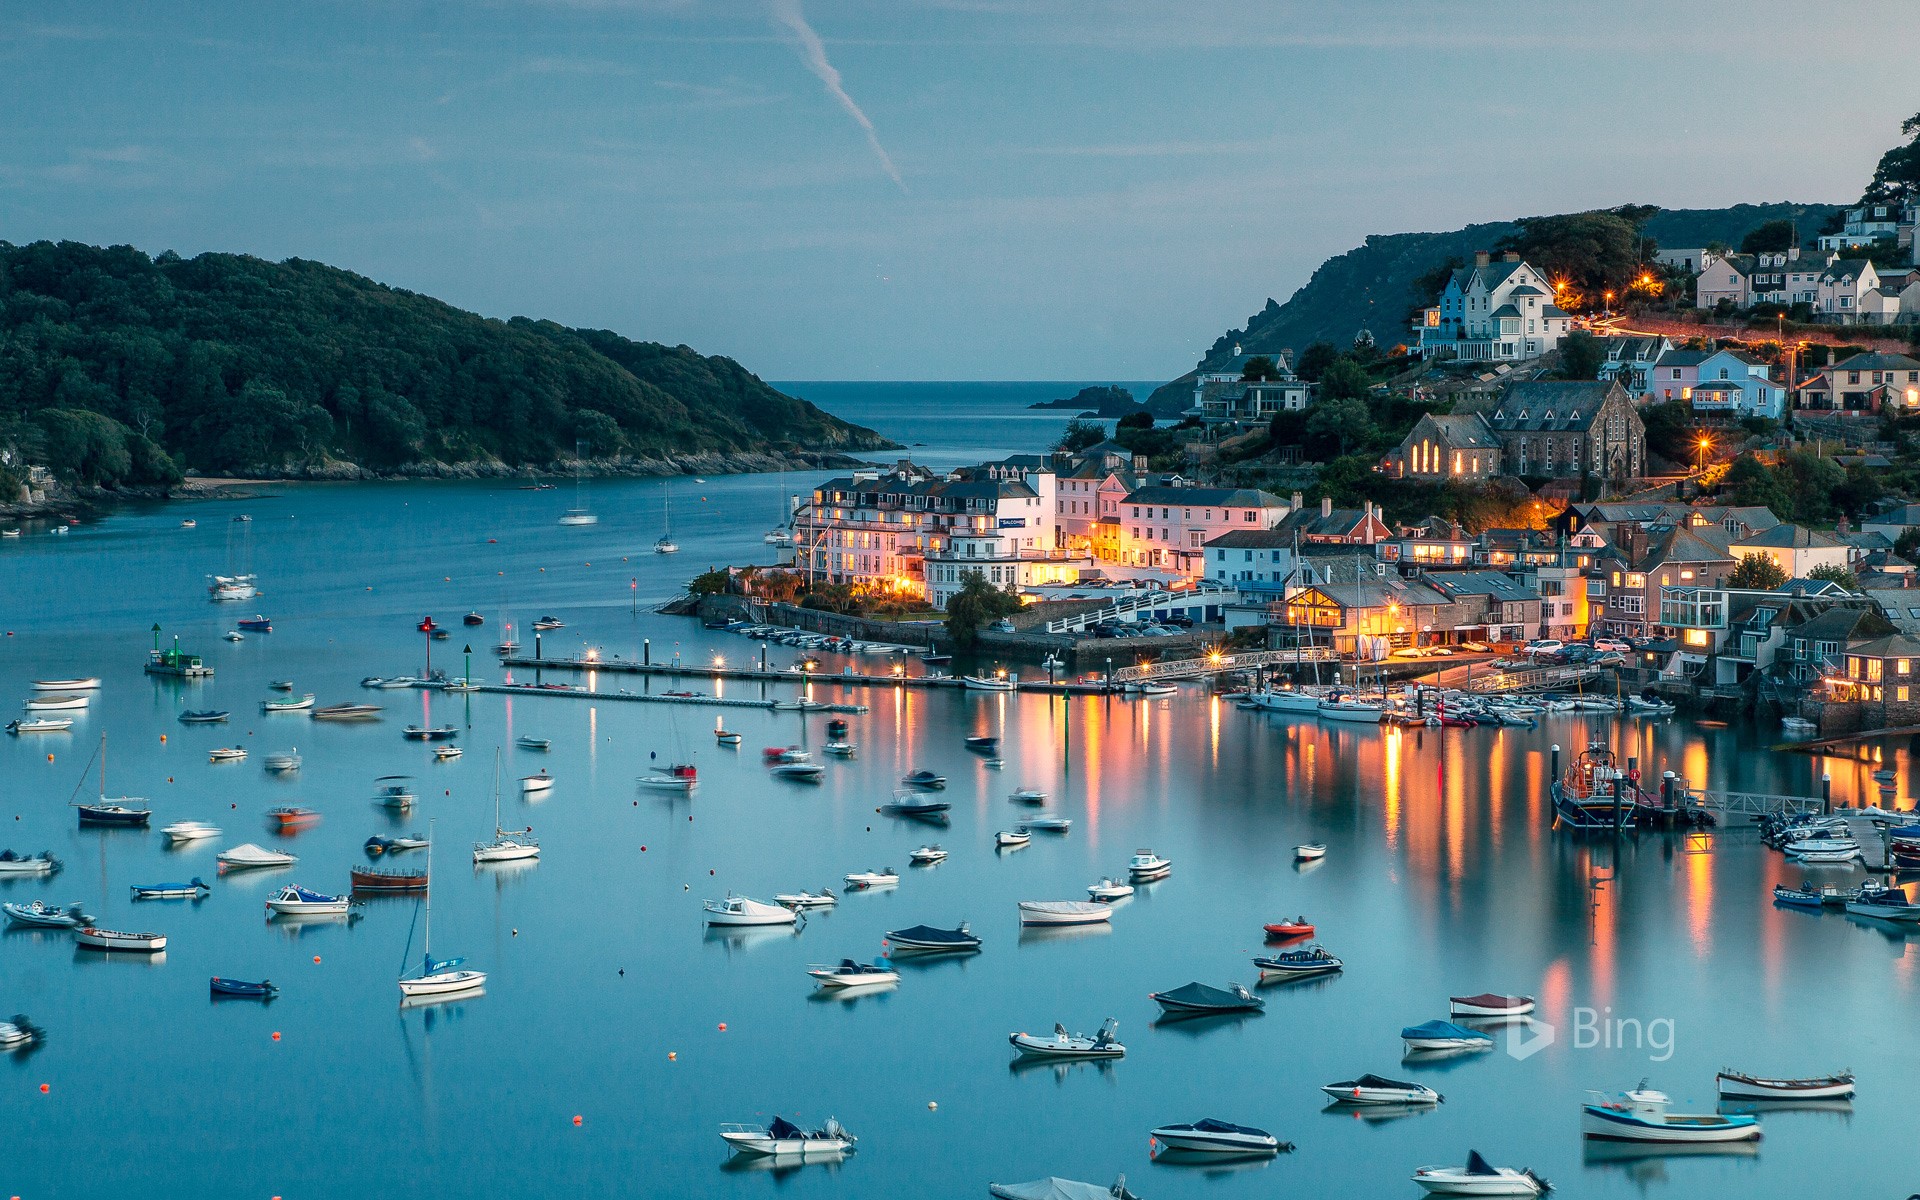 Salcombe Harbour on the south coast of Devon, England